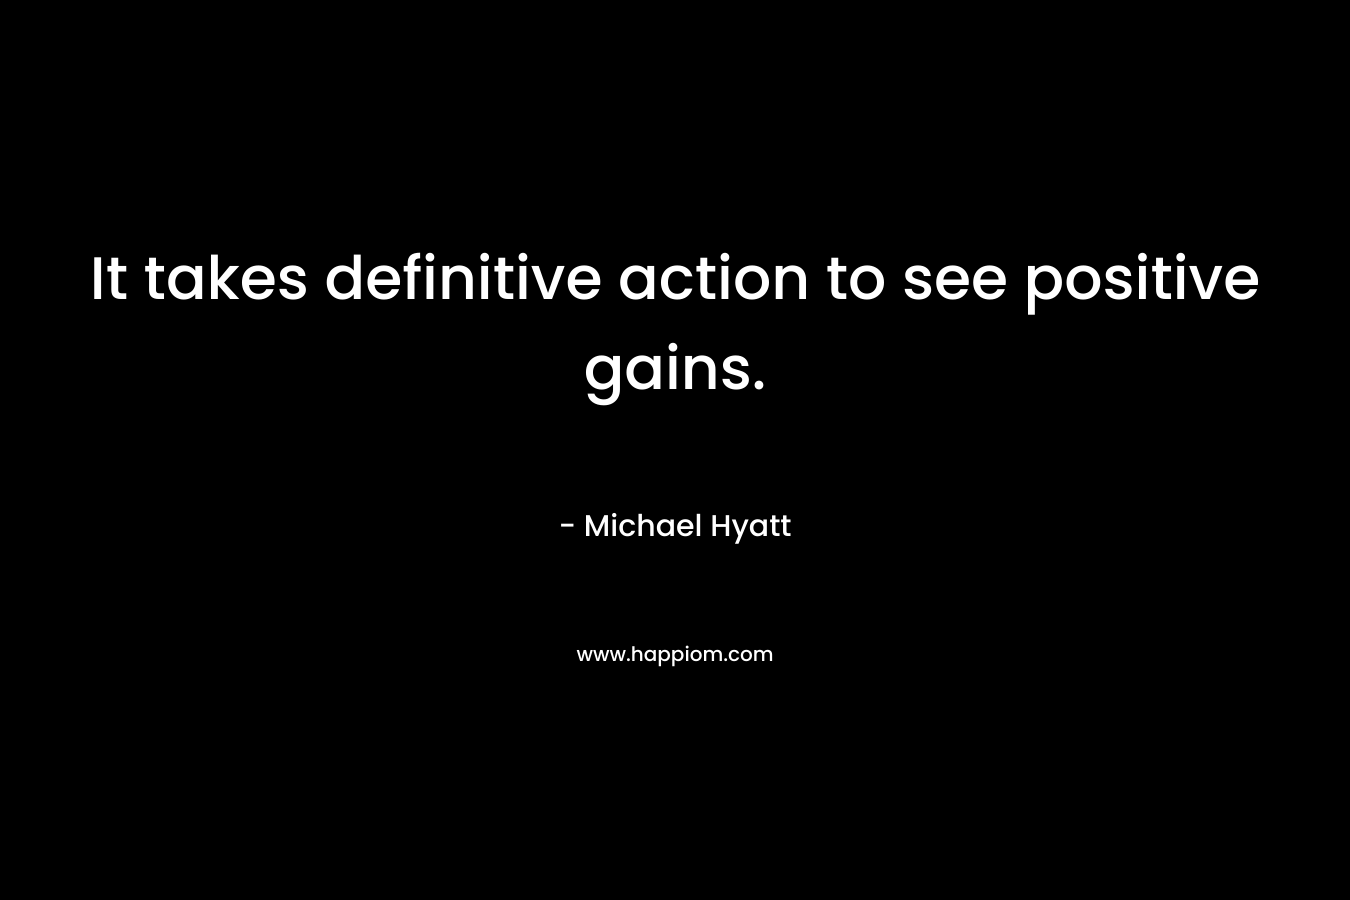 It takes definitive action to see positive gains.